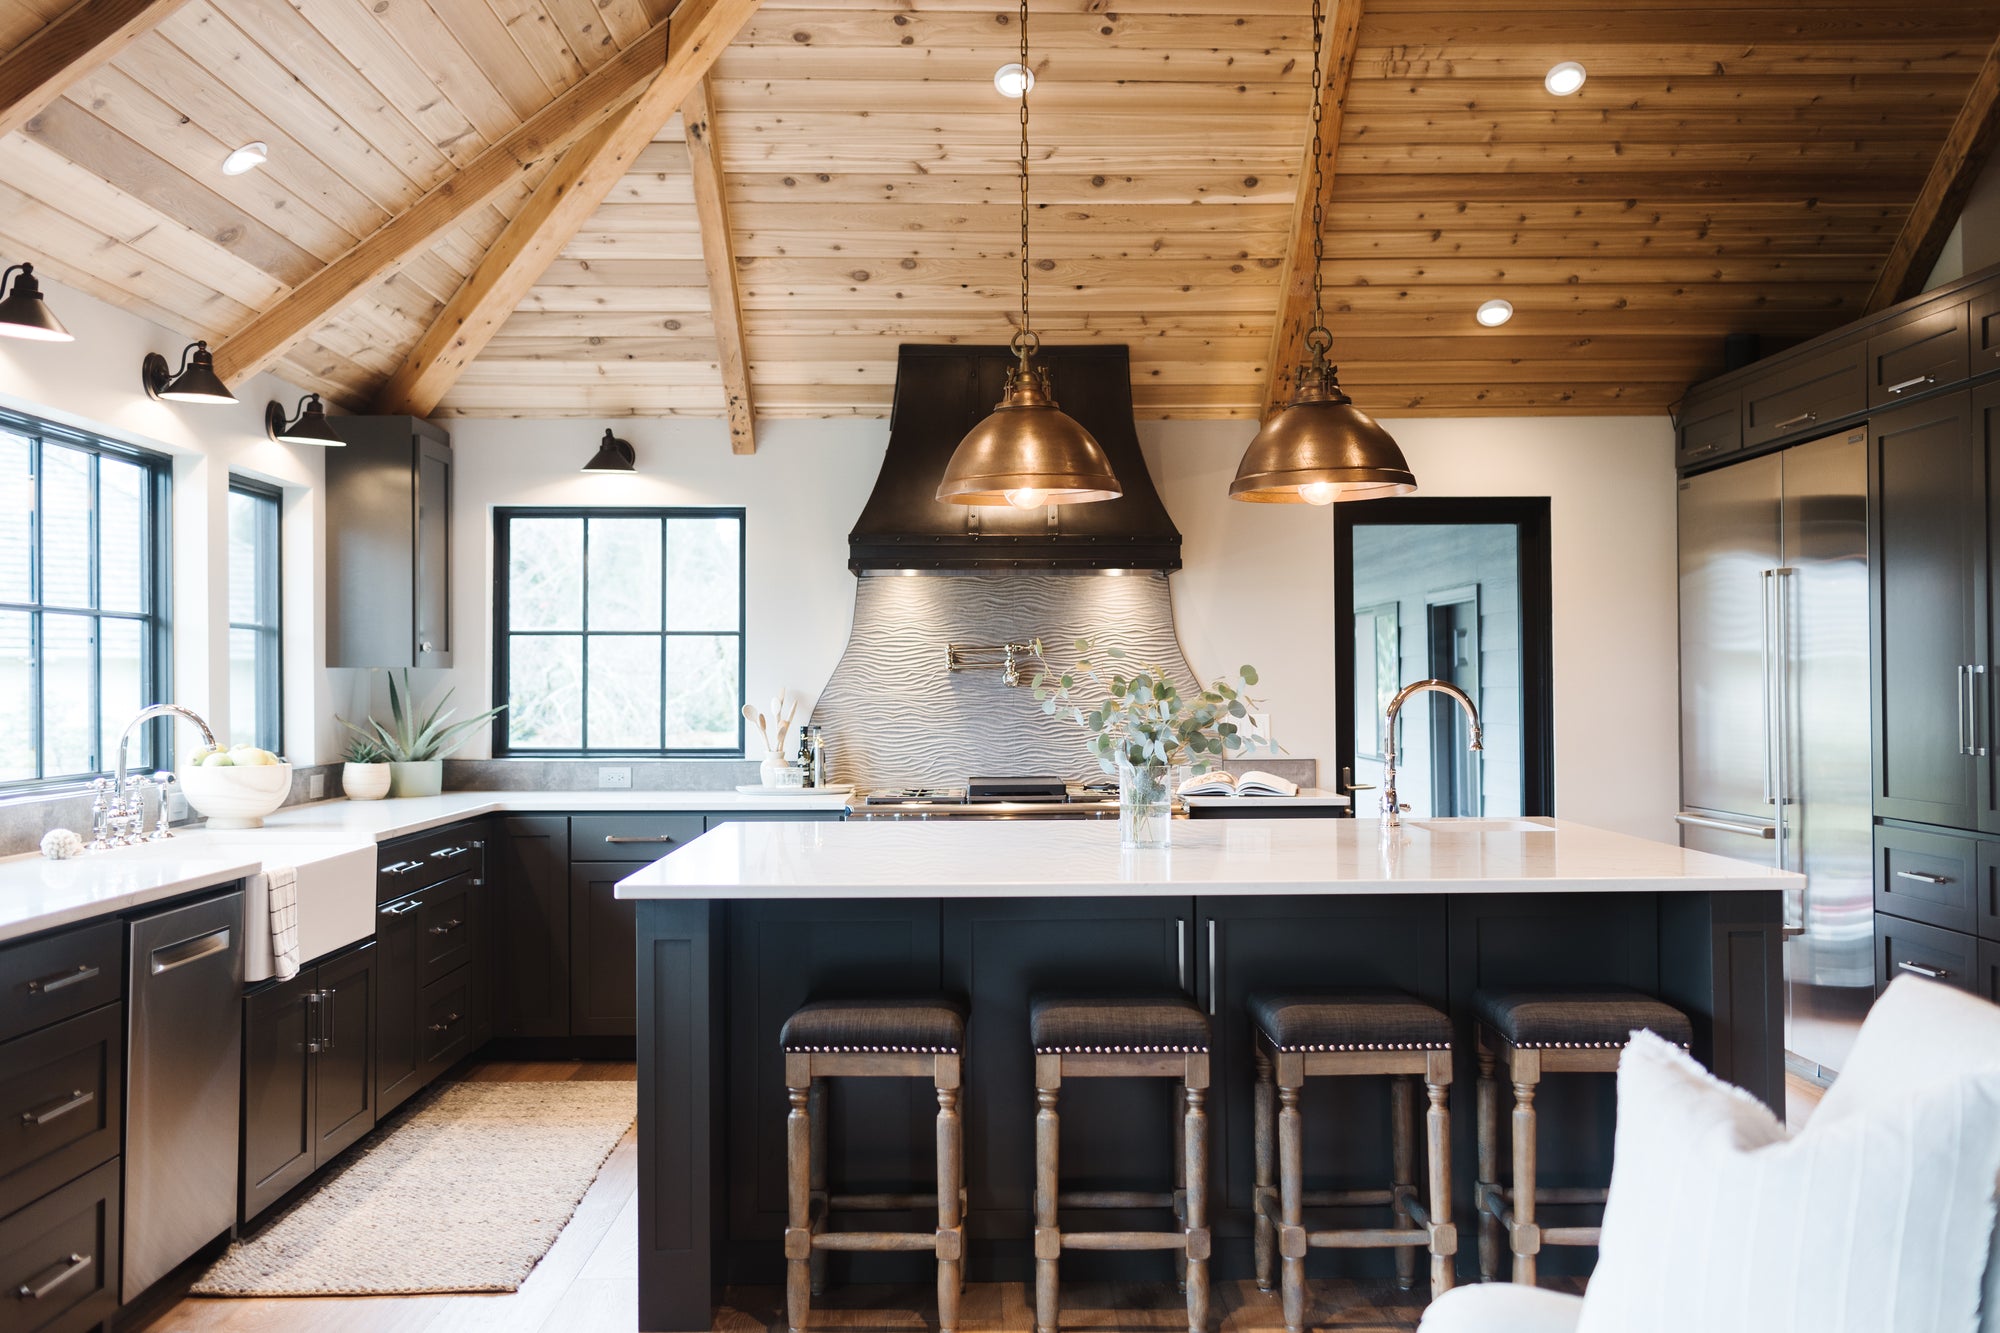 Bright kitchen design with black cabinets, white walls and counters, and gold pendants